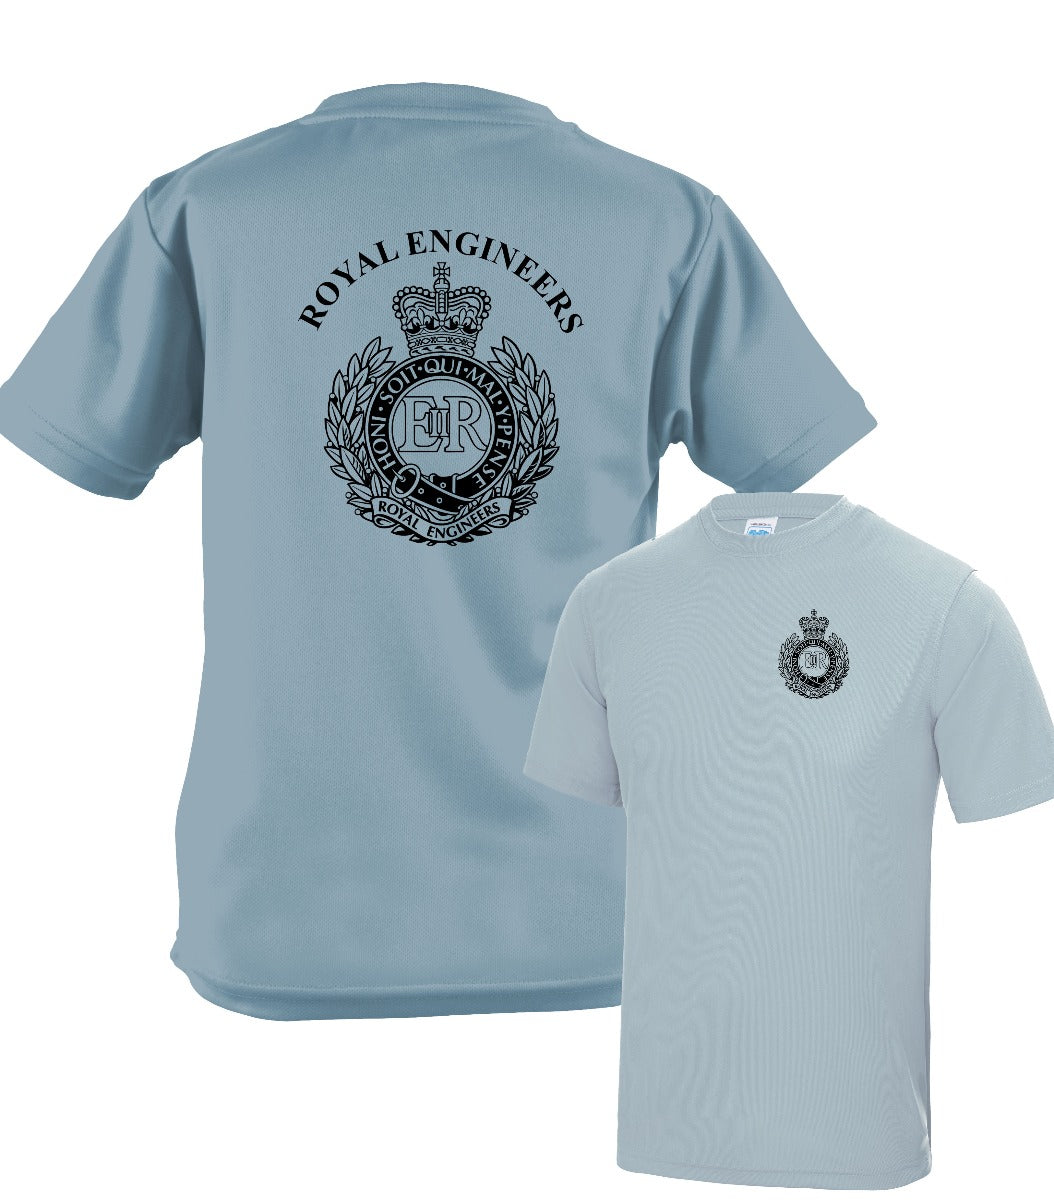 Double Printed Royal Engineers Wicking T-Shirt